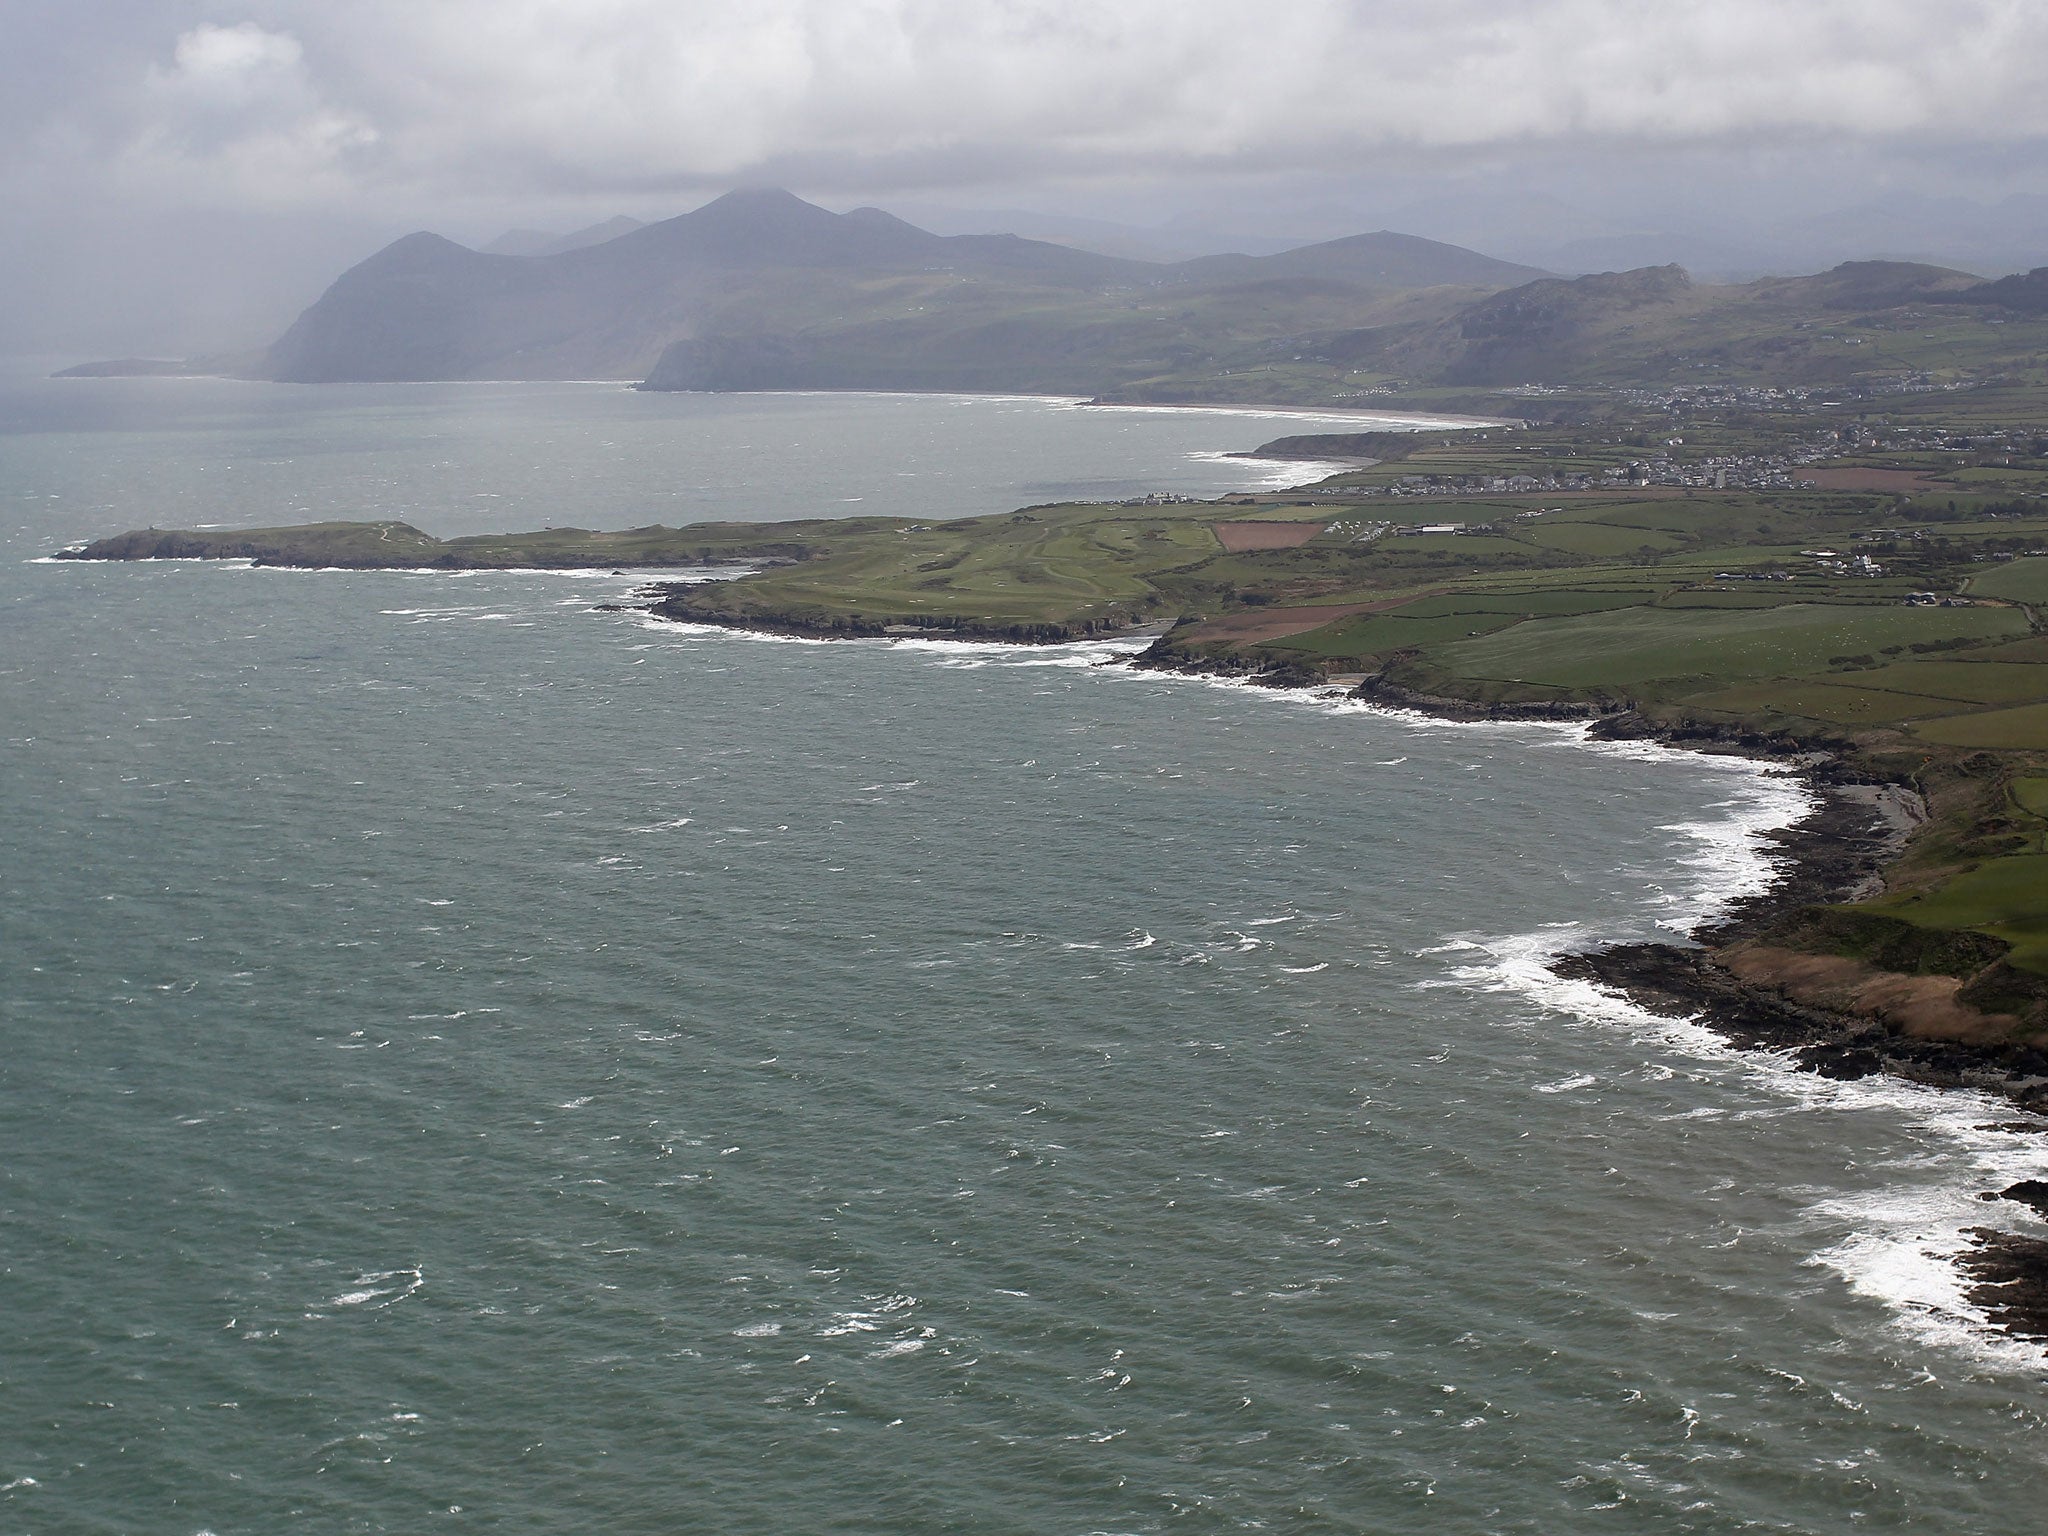 Two bodies were pulled from the sea off the coast of Anglesey